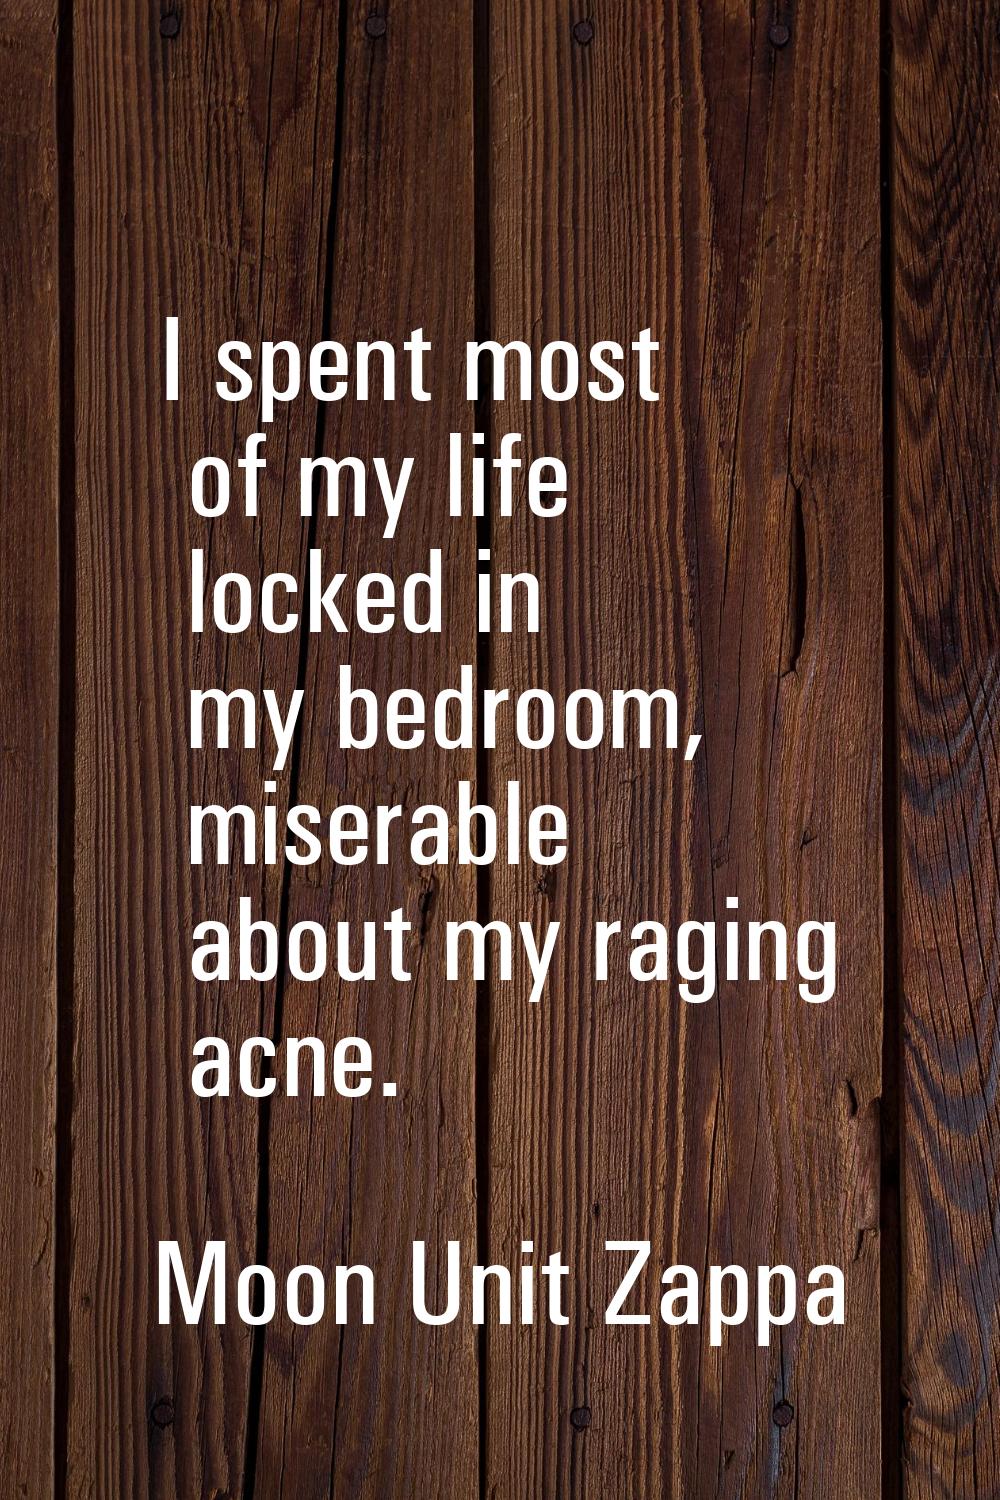 I spent most of my life locked in my bedroom, miserable about my raging acne.